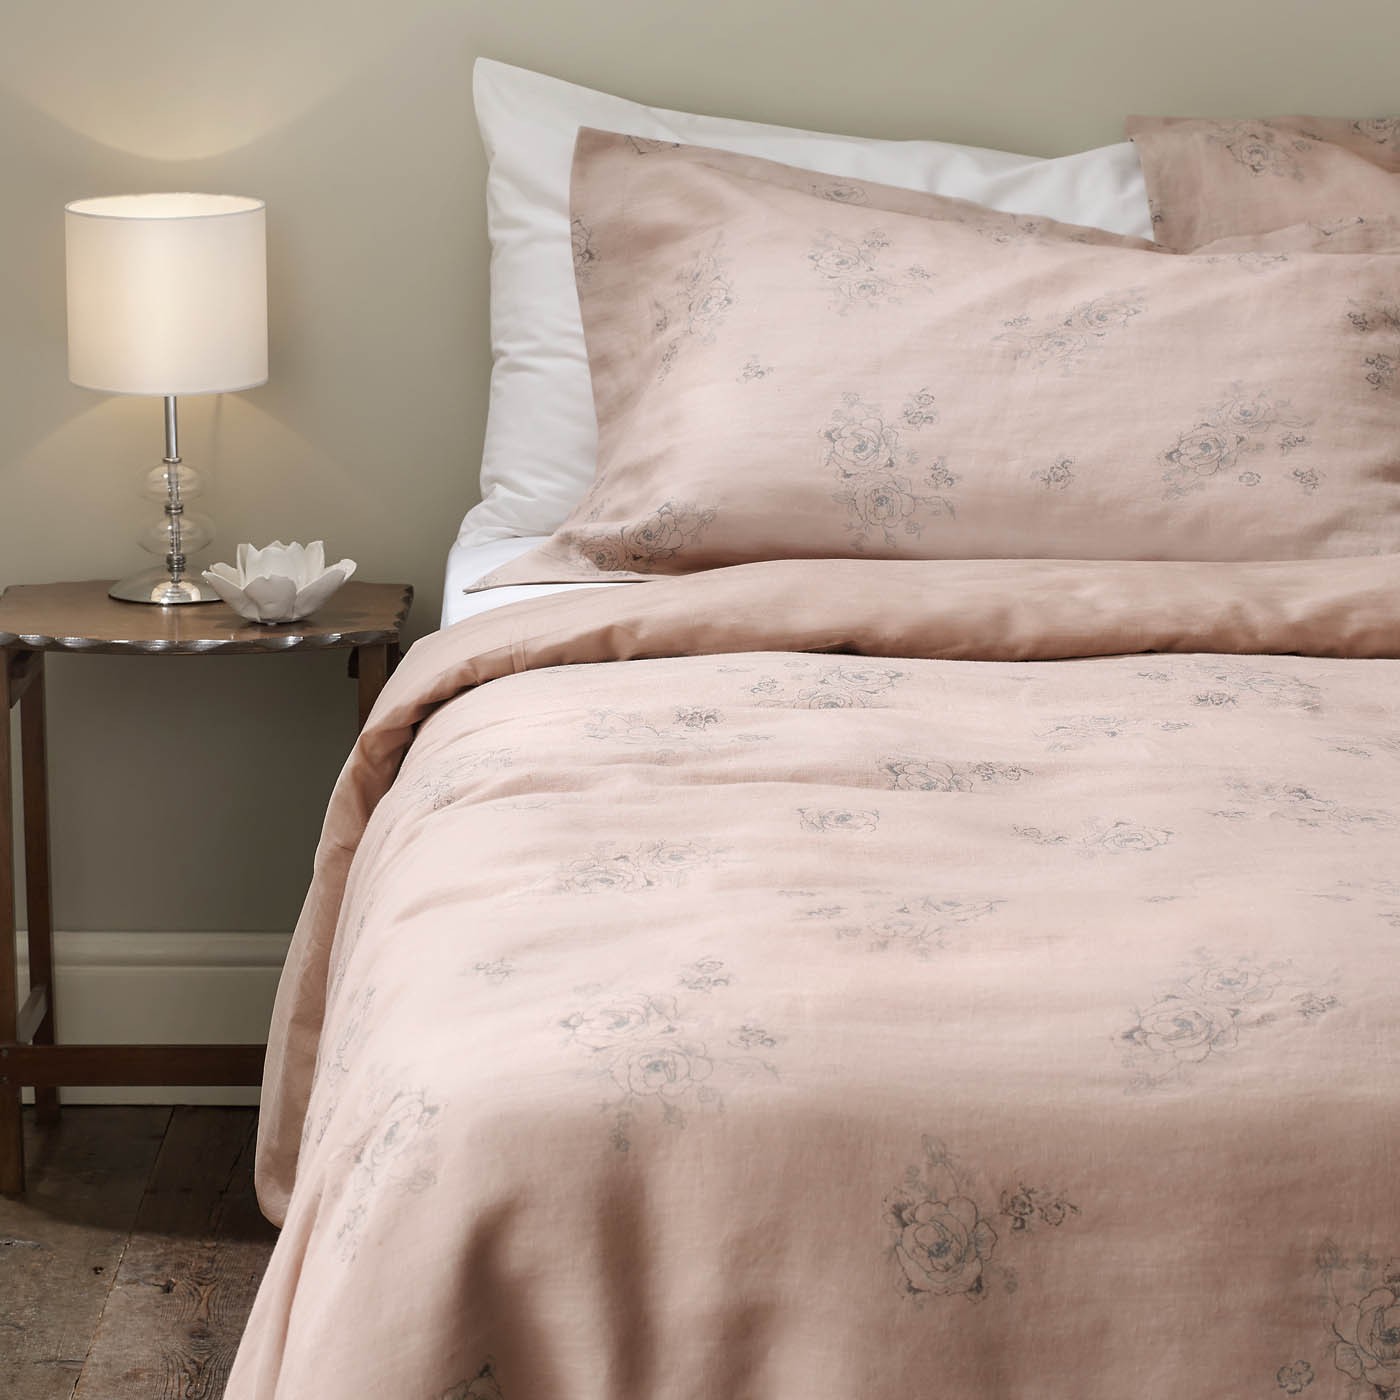 Fading Bedspreads from Geneva Cleaners